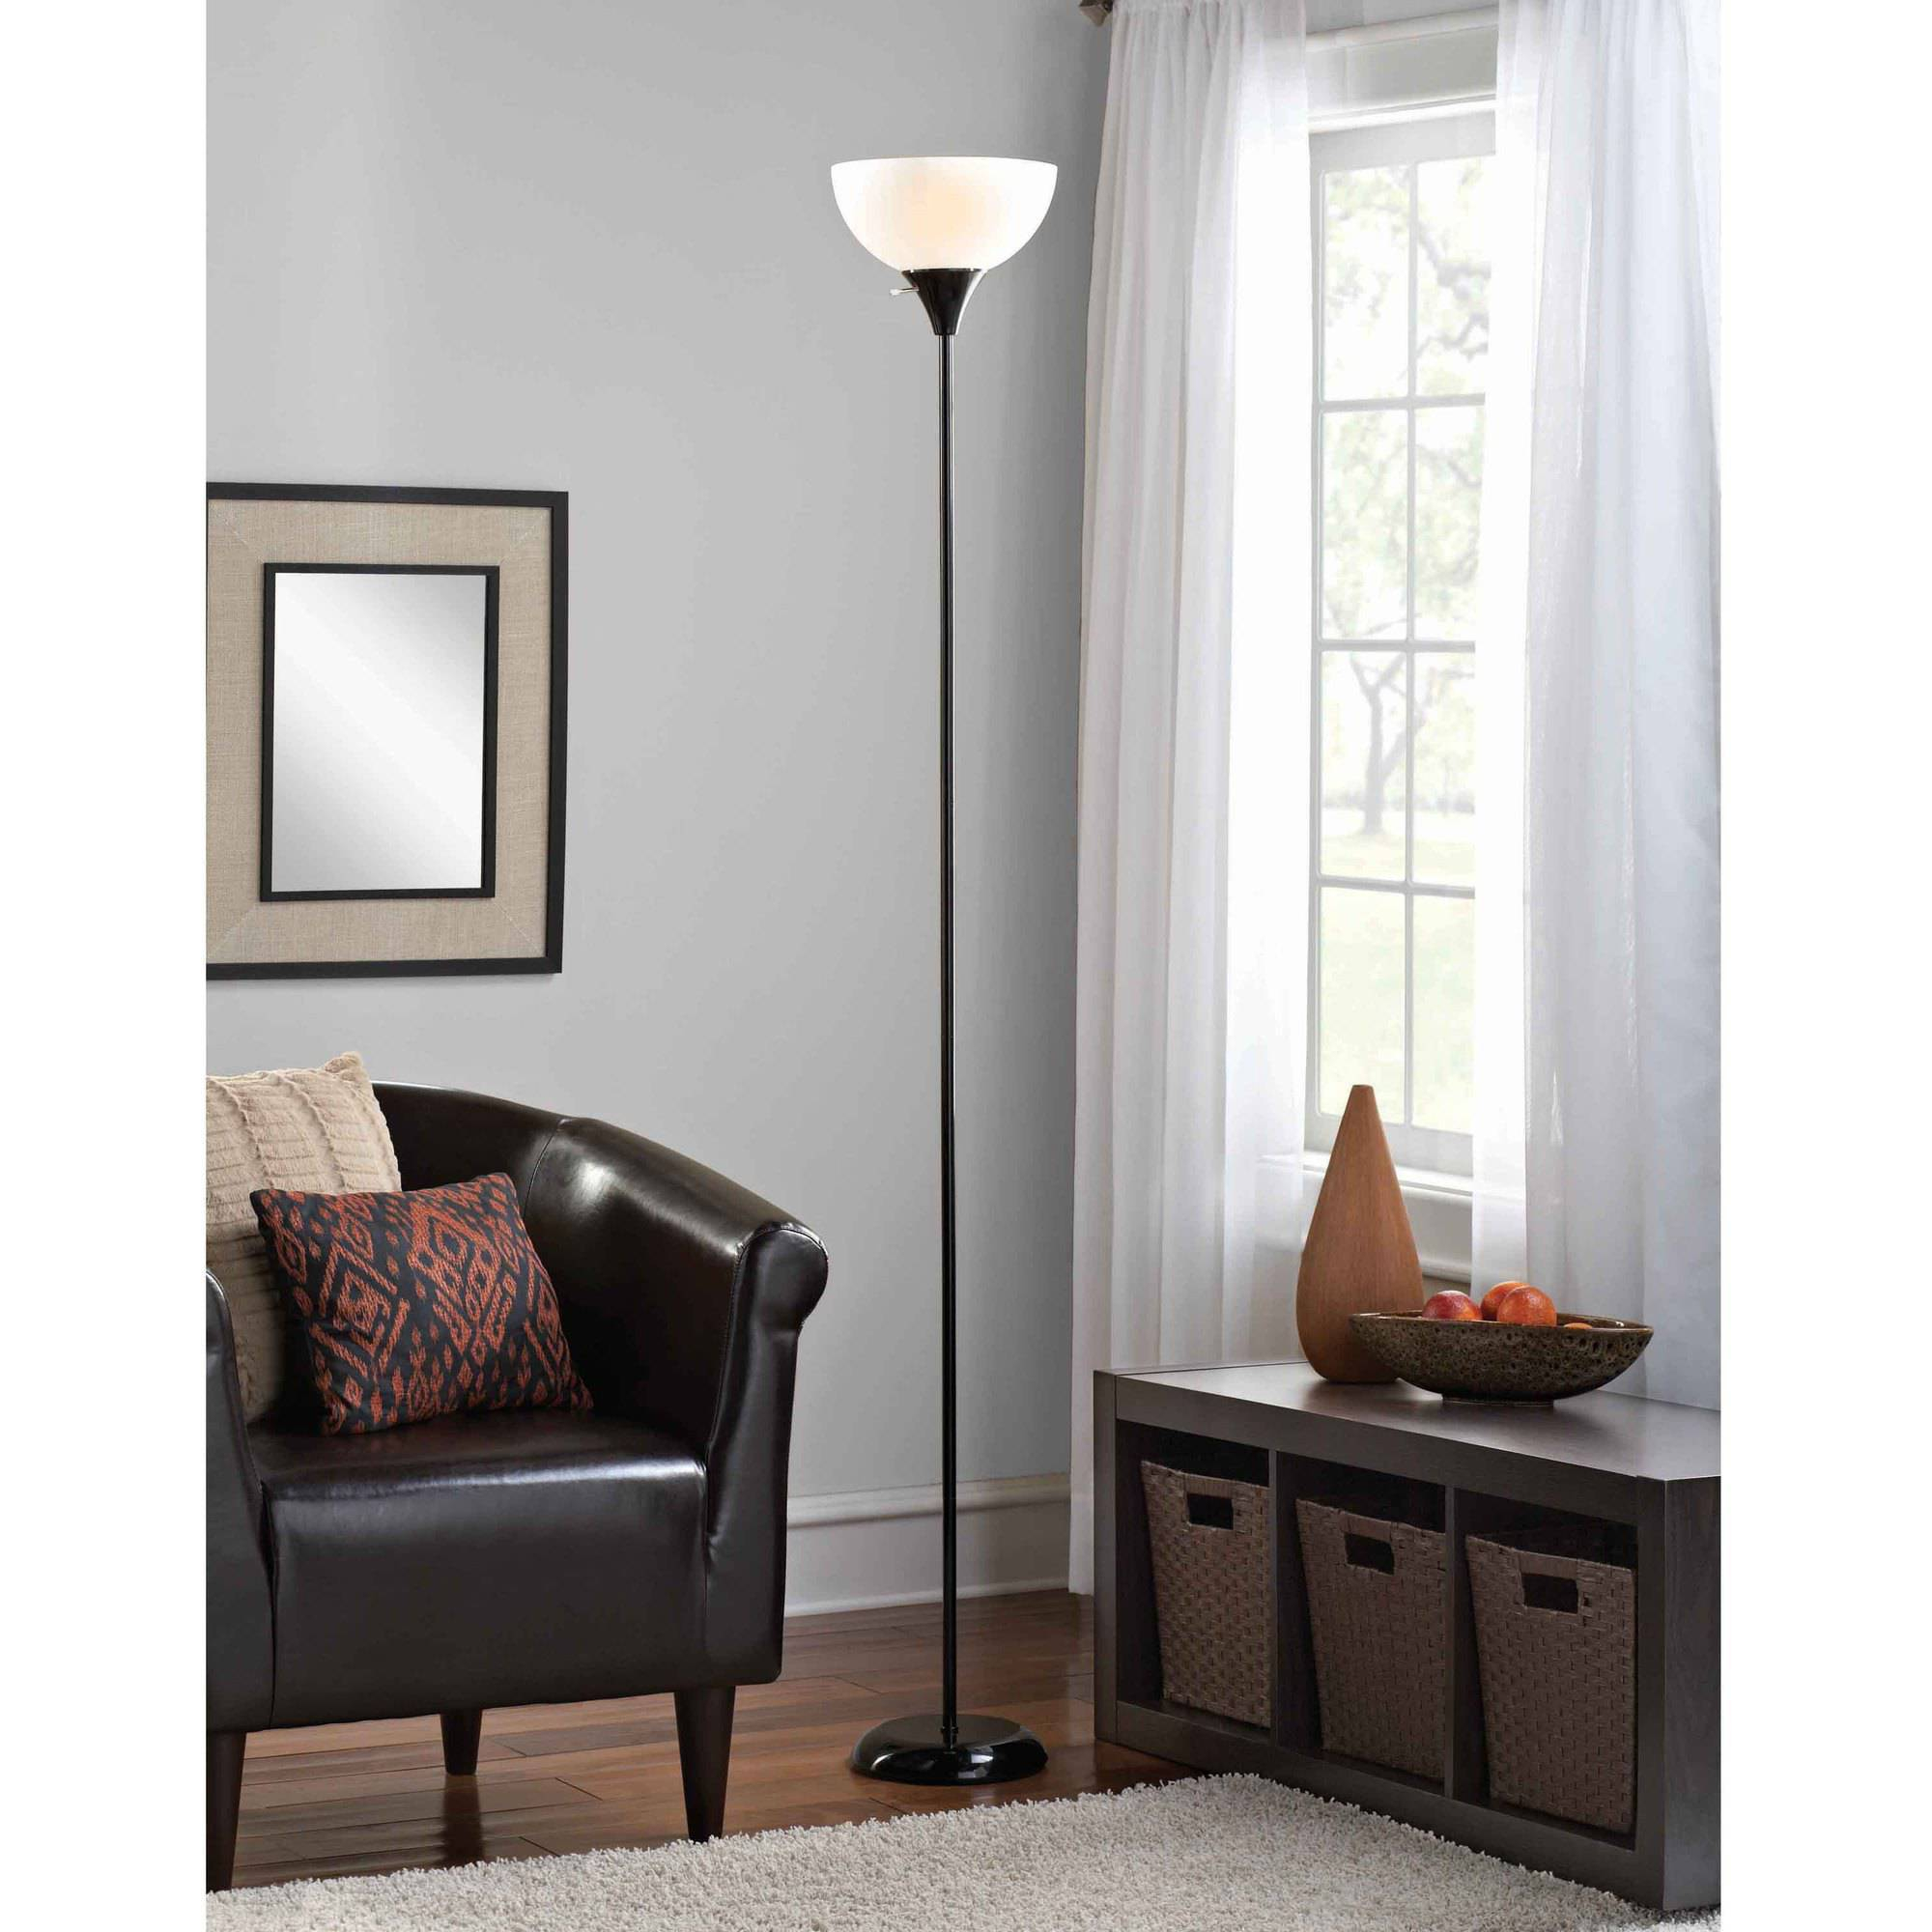 Mainstays Floor Lamp With Bulbs Included Black Walmart for dimensions 2000 X 2000